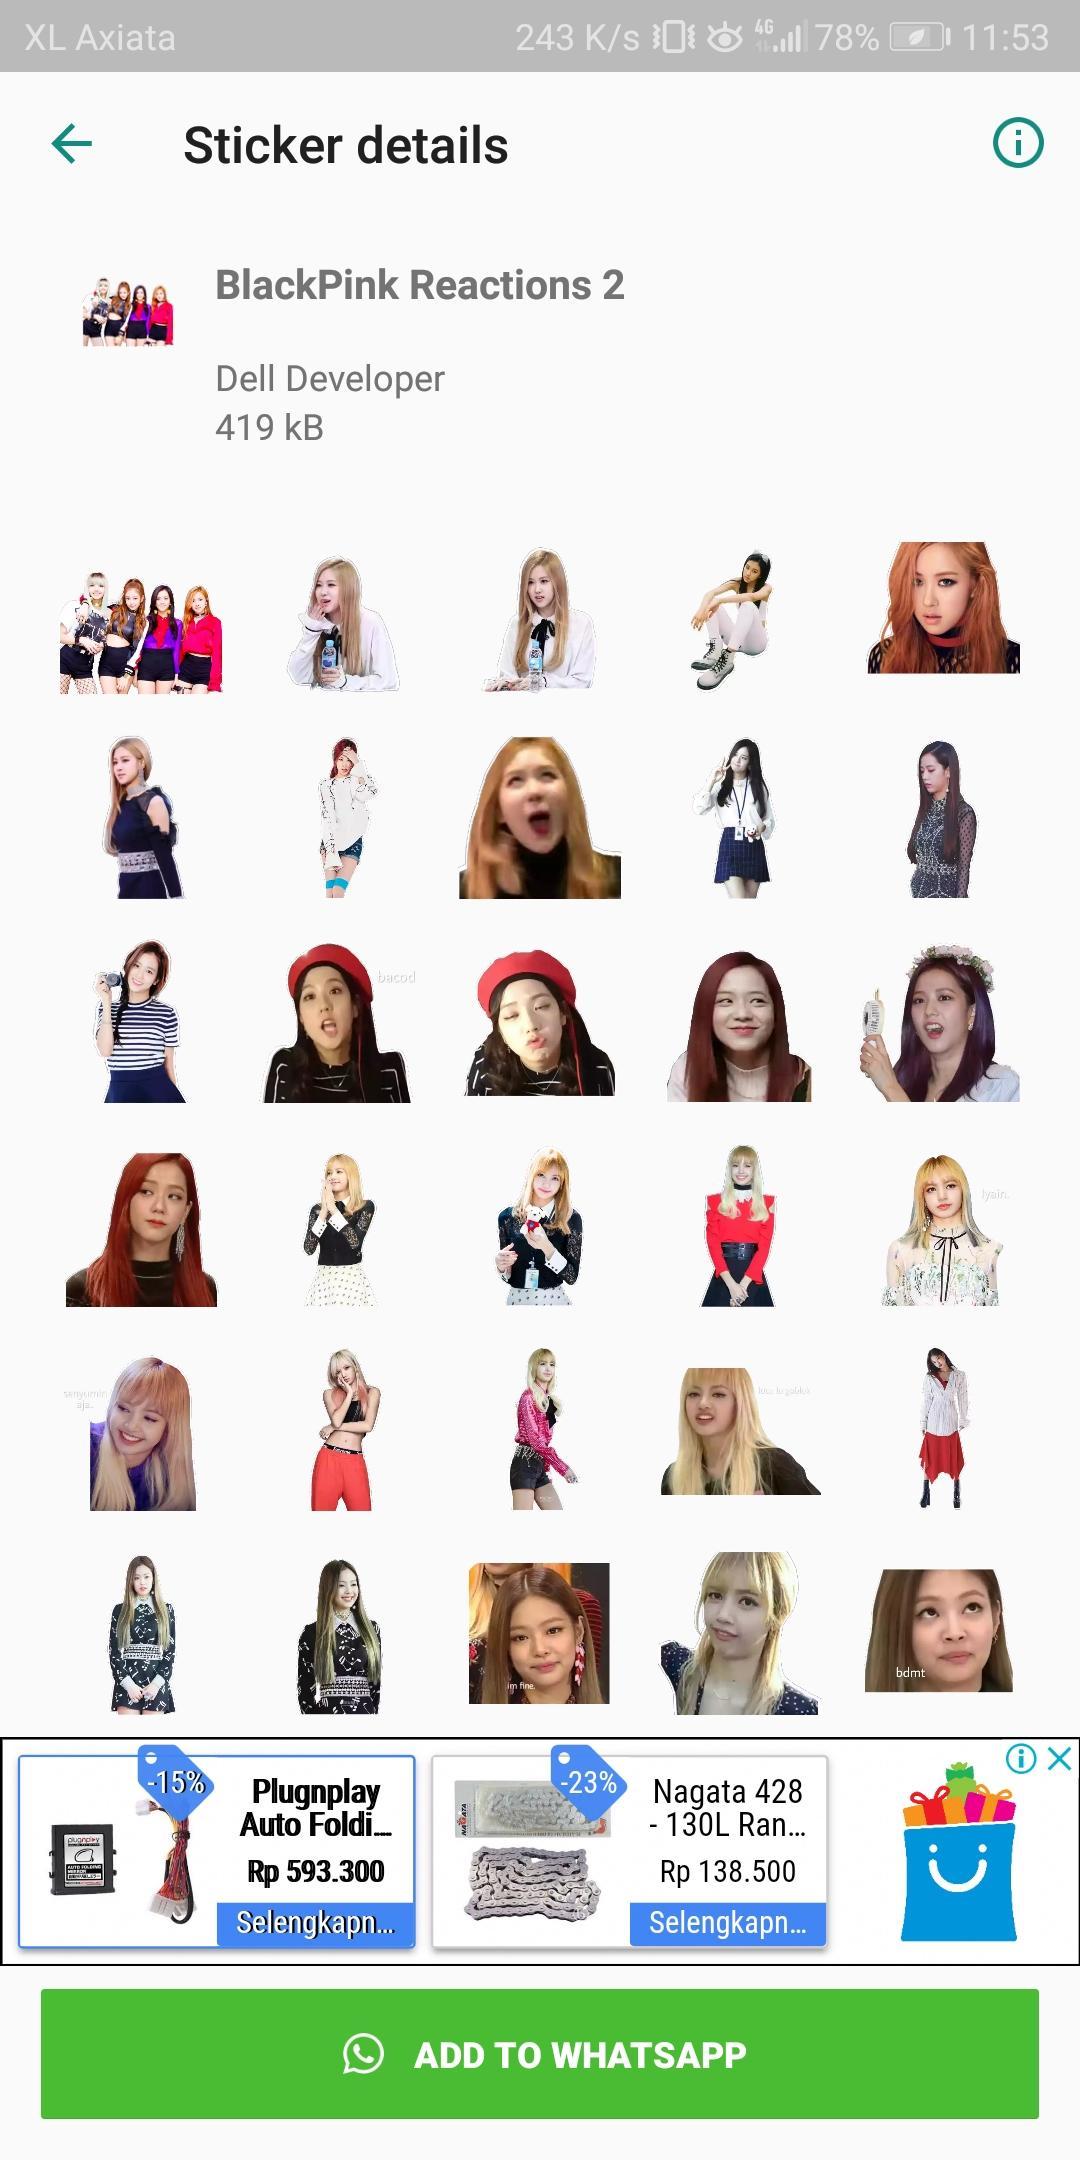  WA  Kpop Stiker  for Android APK Download